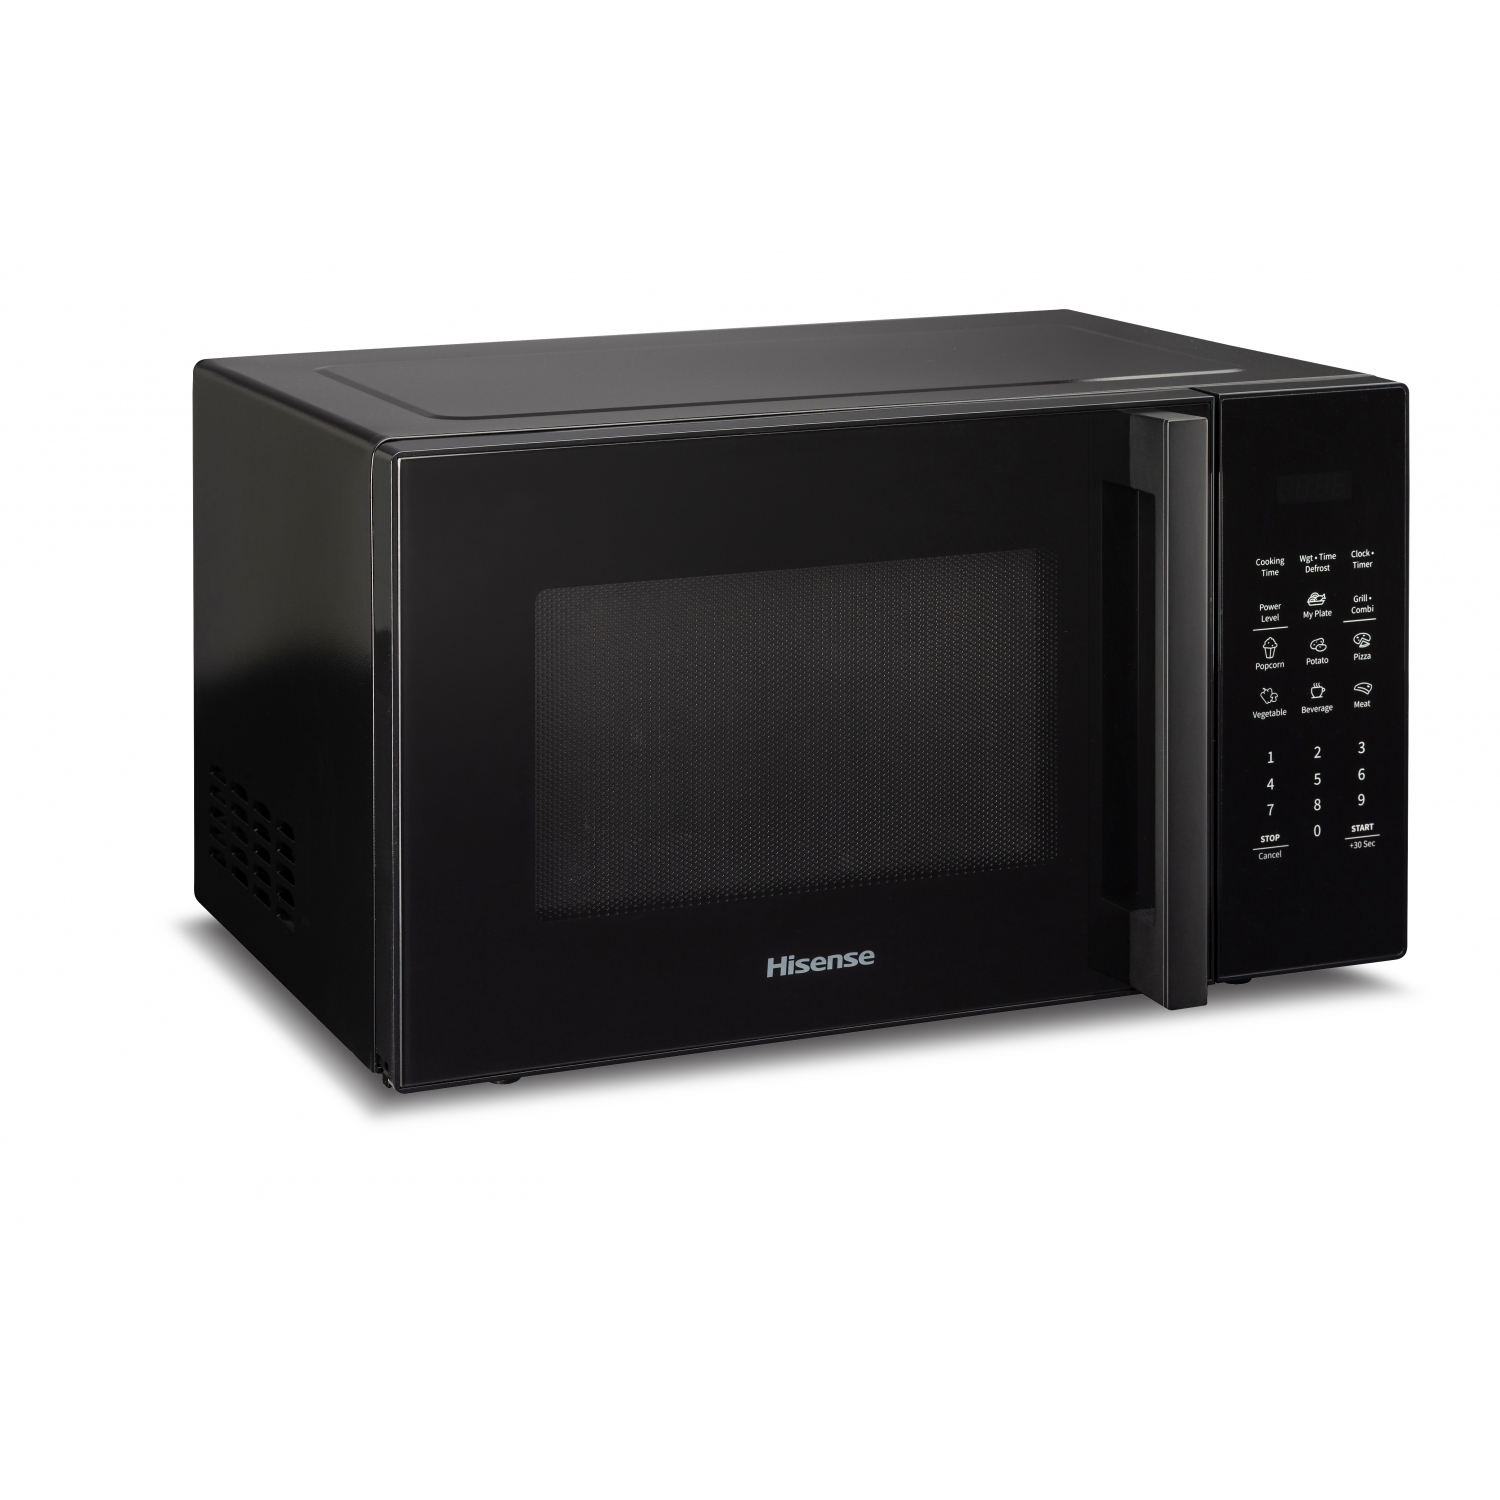 Hisense H28MOBS8HGUK 28 Litre Microwave with Grill - Black - 3